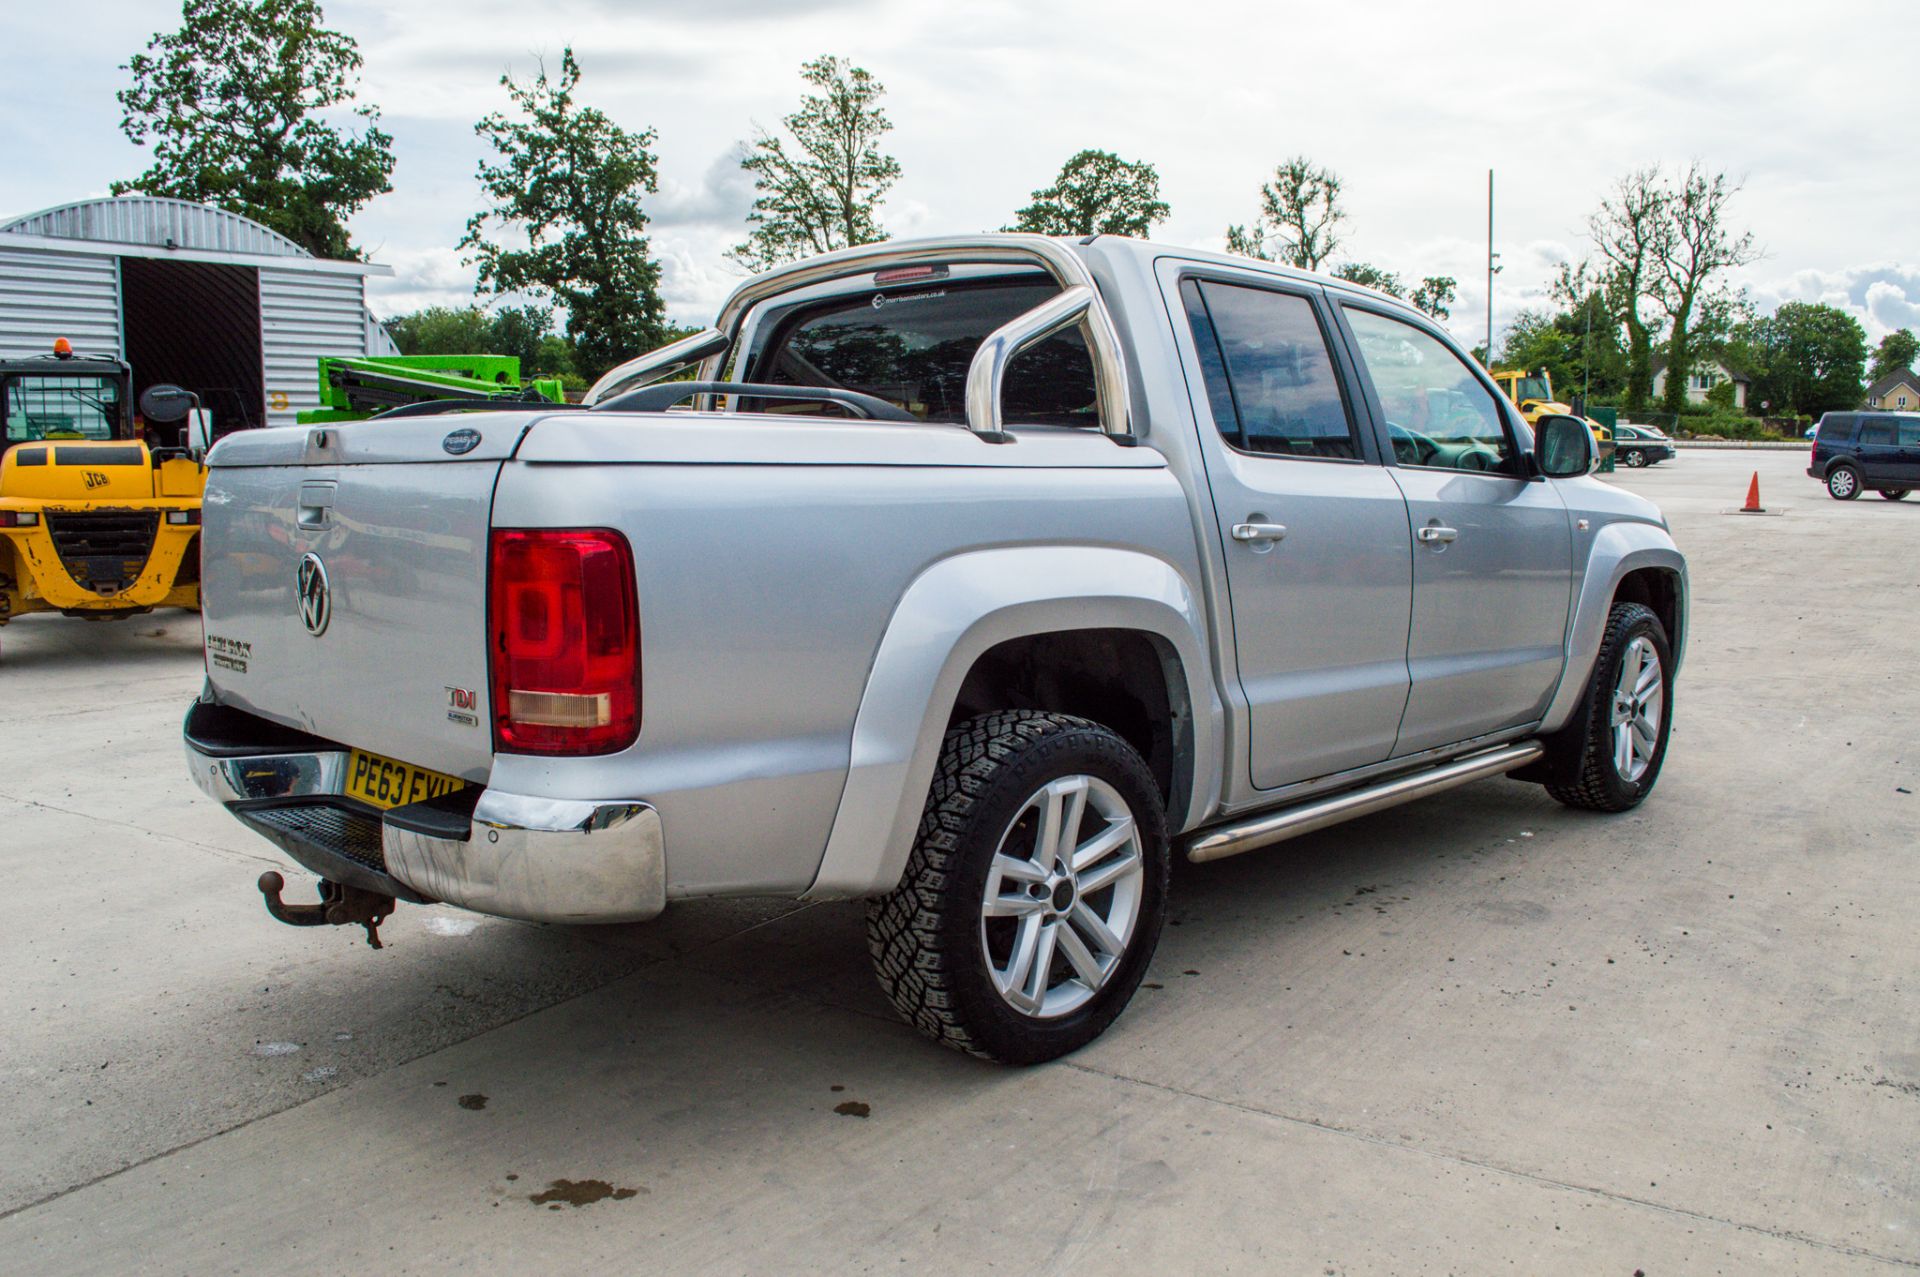 Volkswagen Amarok 2.0 TDI highline 4wd automatic double cab pick up Reg No: PE63 EYH Date of - Image 3 of 30